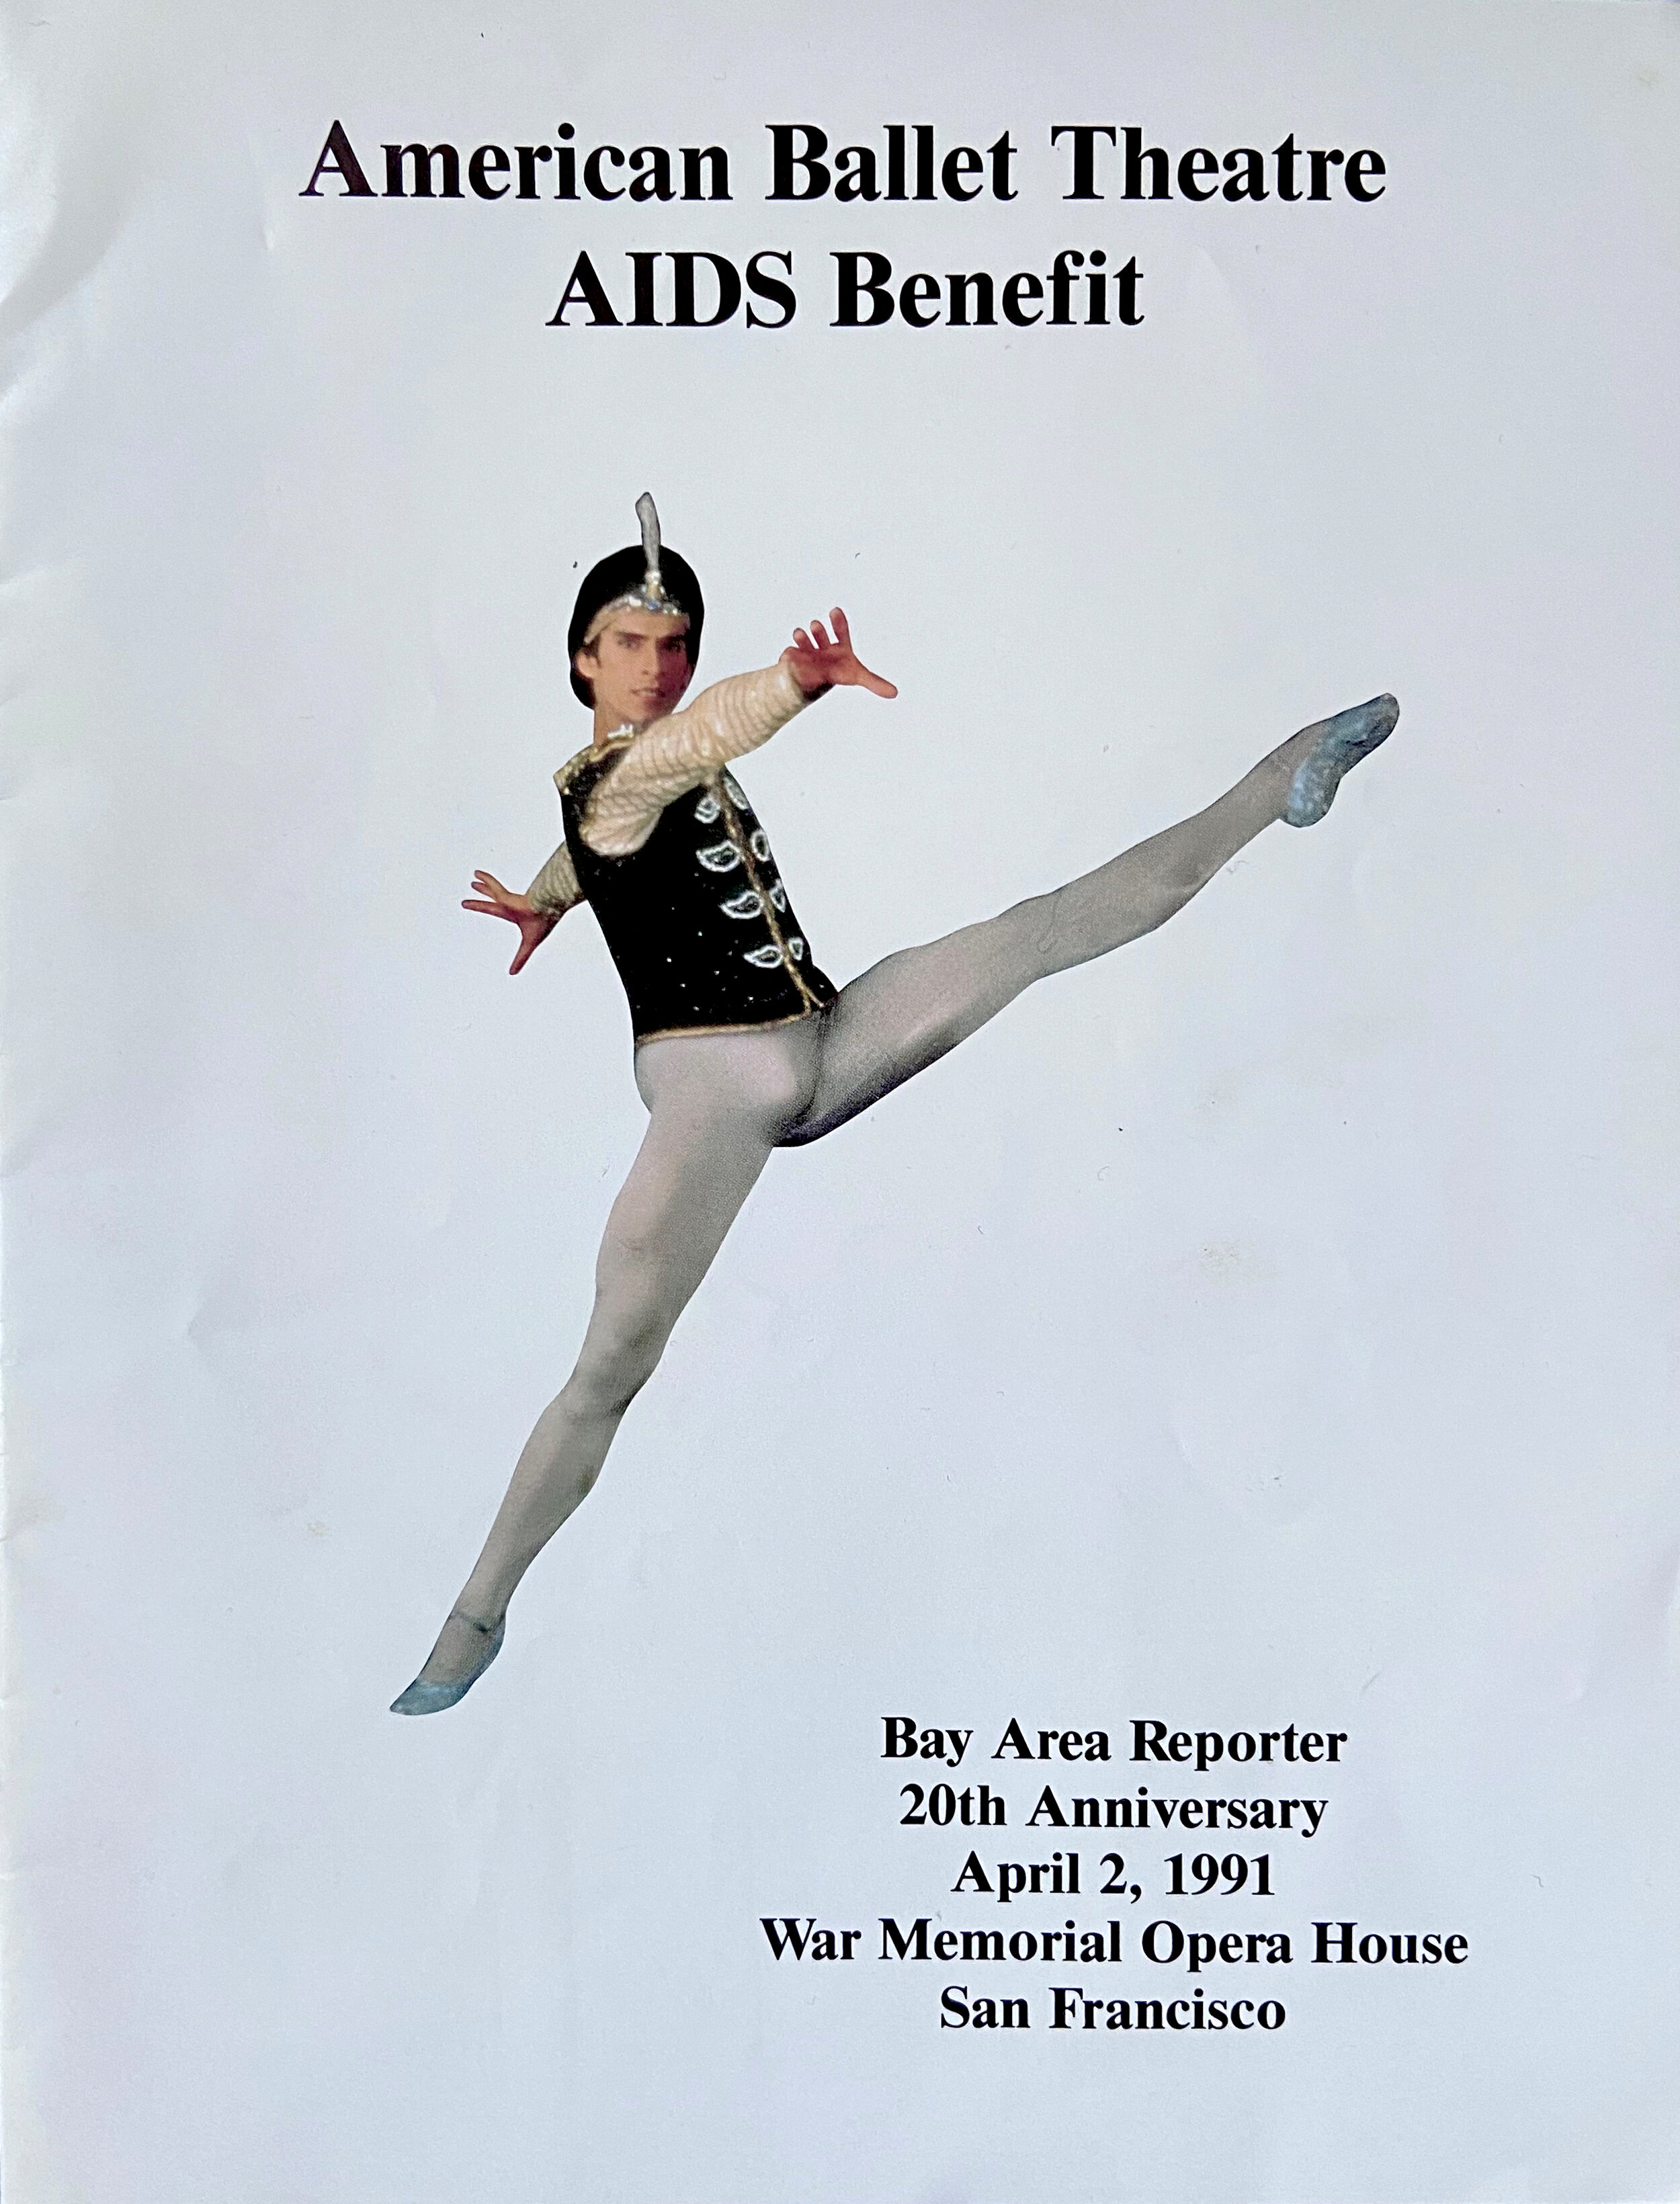  “American Ballet Theatre AIDS Benefit” flyer, B.A.R. 20th Anniversary, War Memorial Opera House, San Francisco, April 2, 1991; Ephemera Collection (Business-Bay Area Reporter), GLBT Historical Society. 